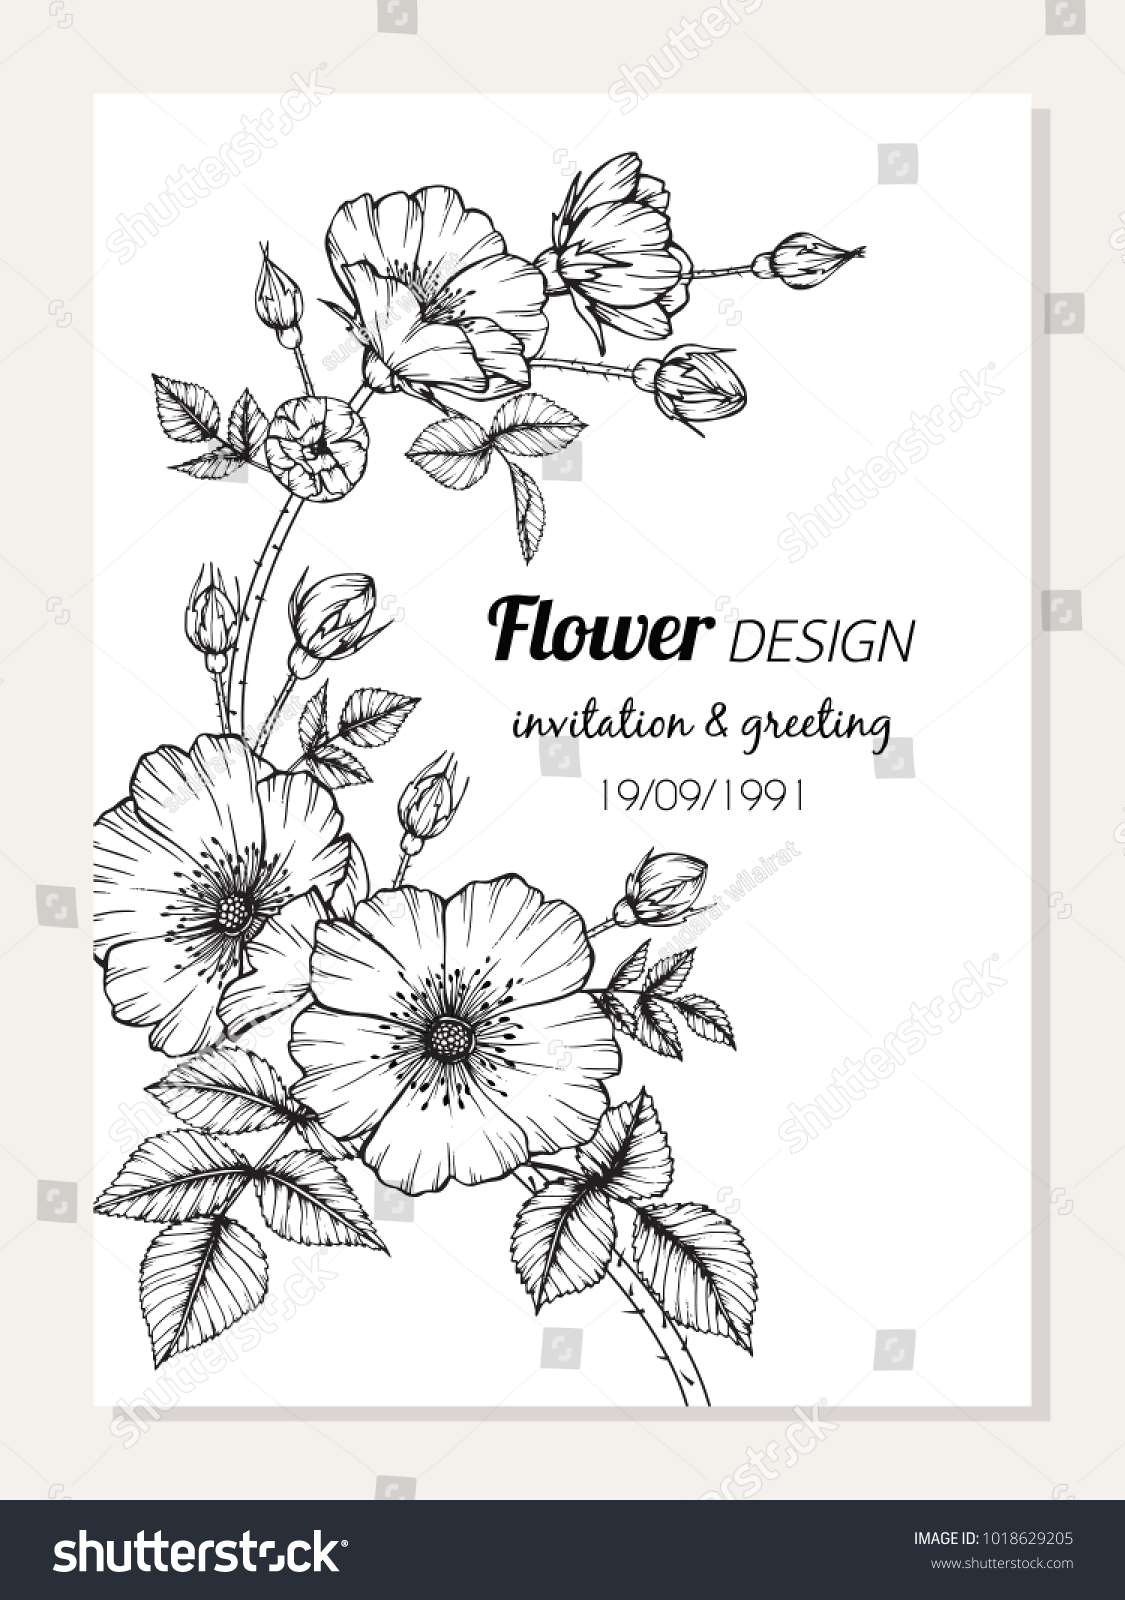 Invitation and greeting card design with Roses flower drawing  illustration.  #1018629205